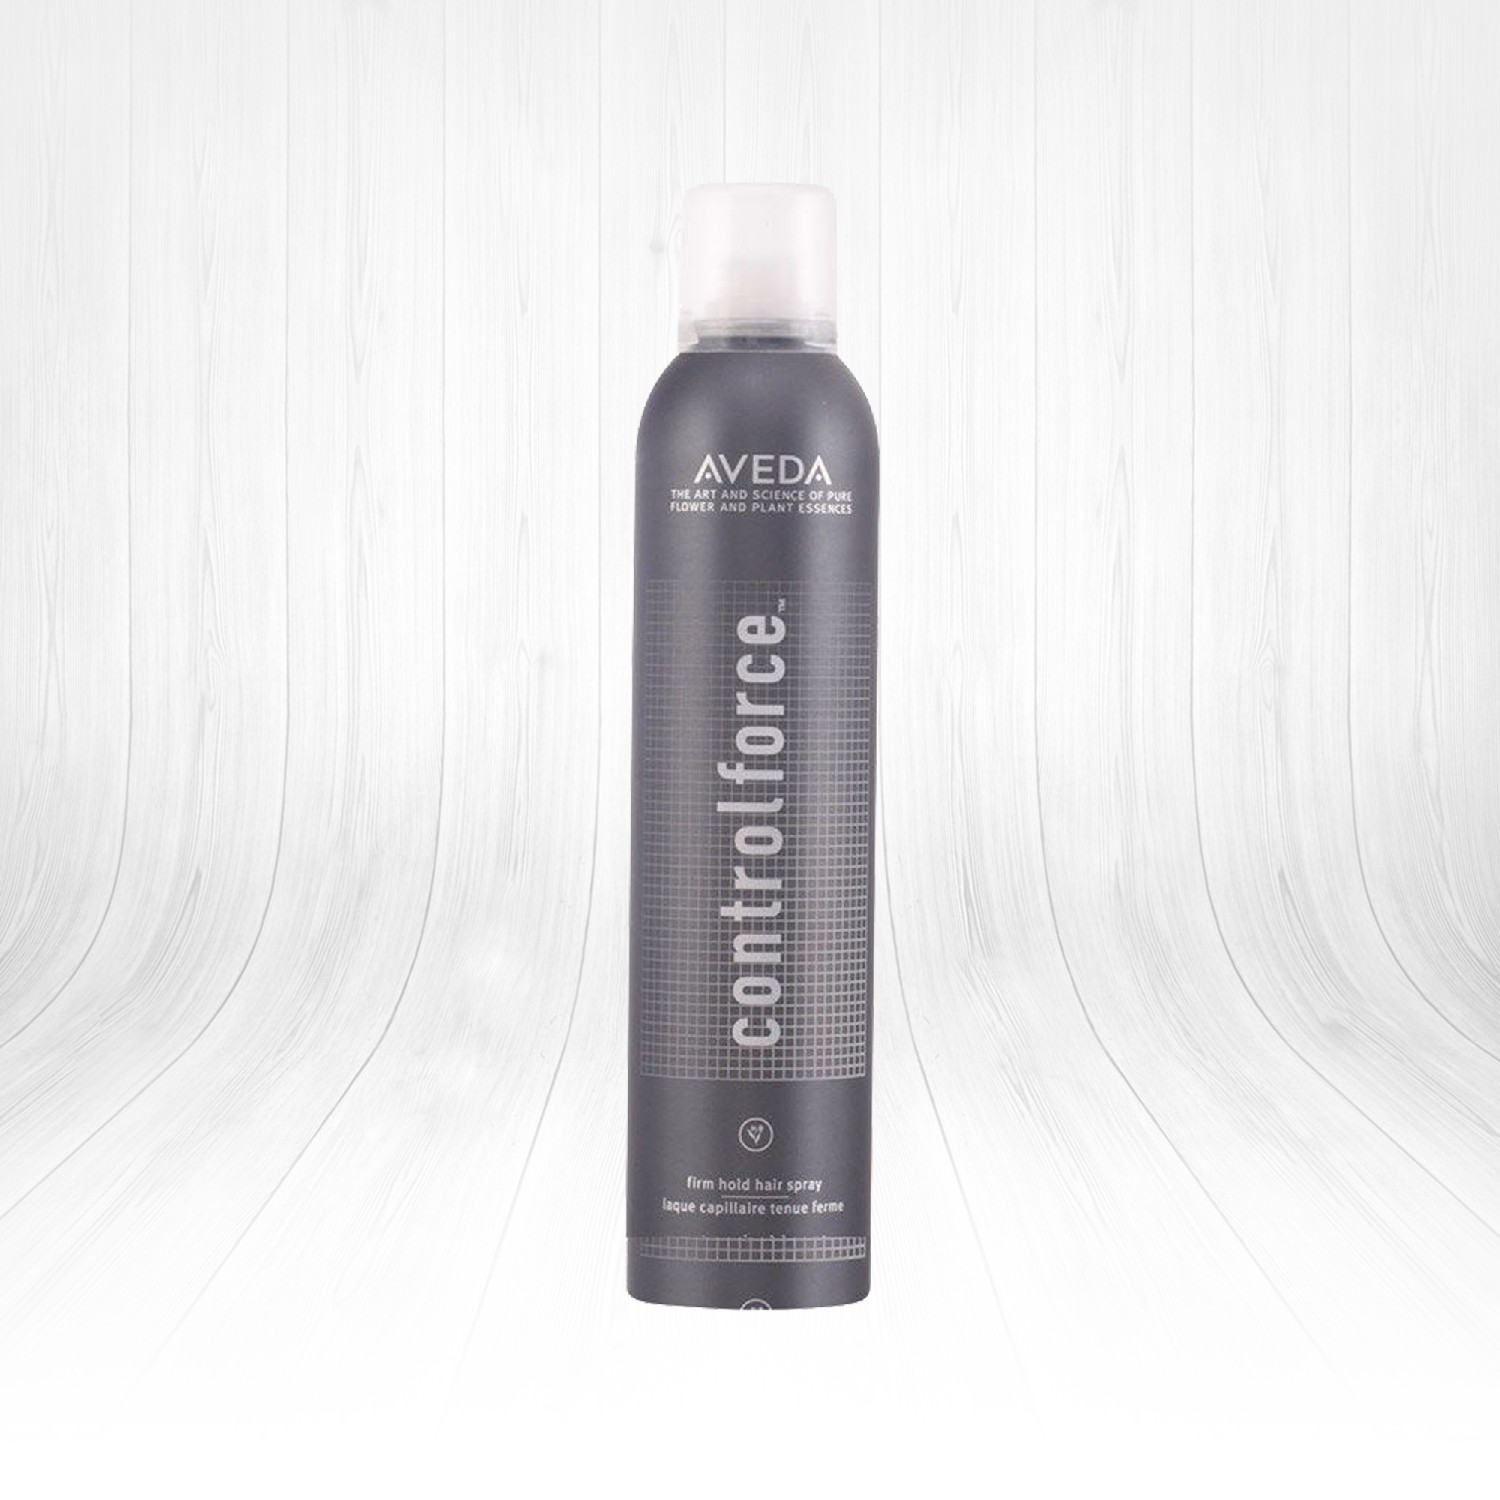 Aveda Control Force Firm Hold Sac Spreyi